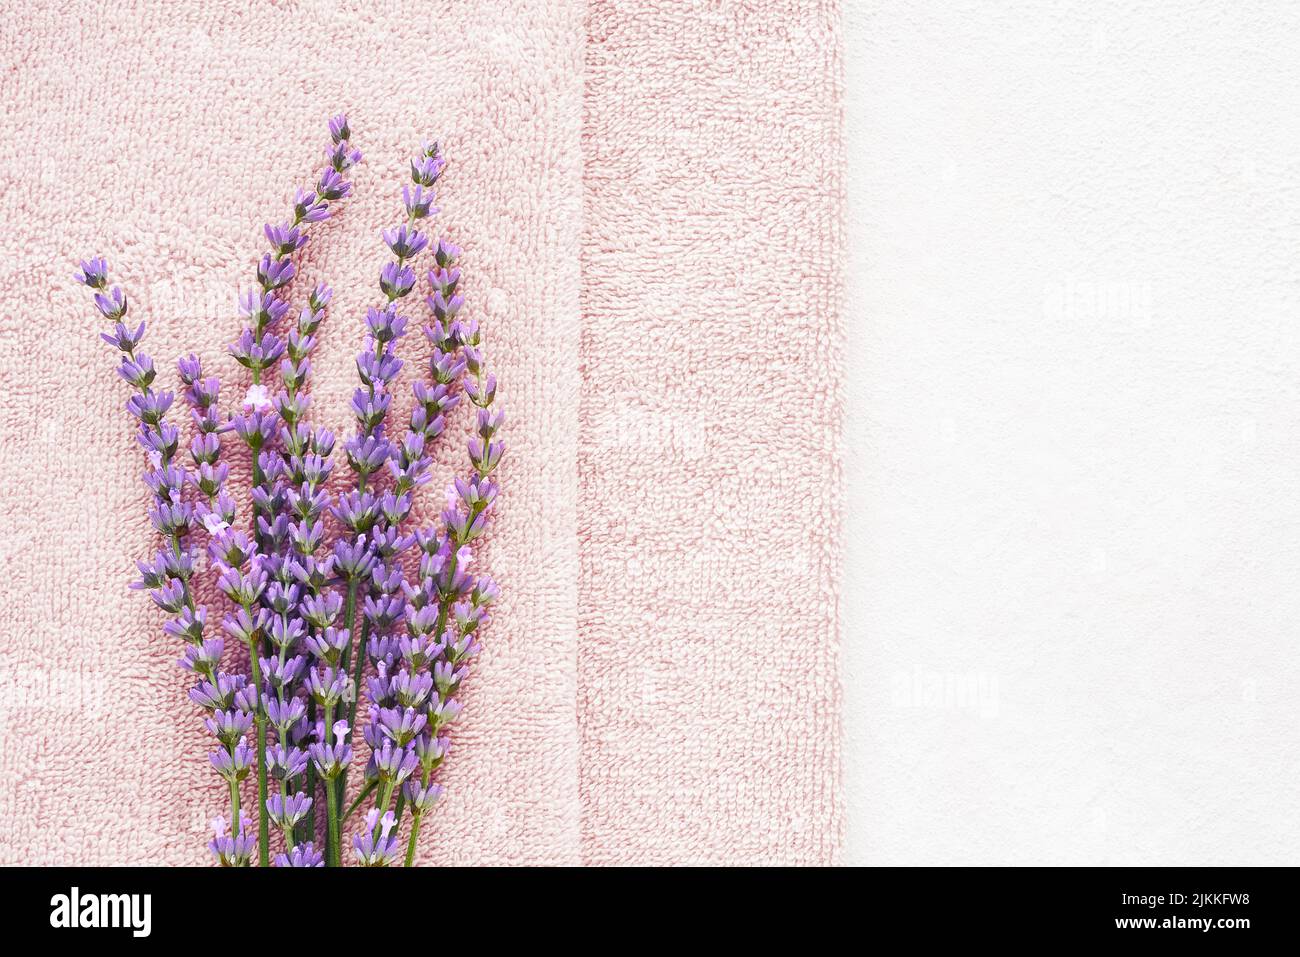 Lavender flowers and pink fluffy towels on the light background. SPA, wellness well-being, body care concept. Copy space for text, top view Stock Photo